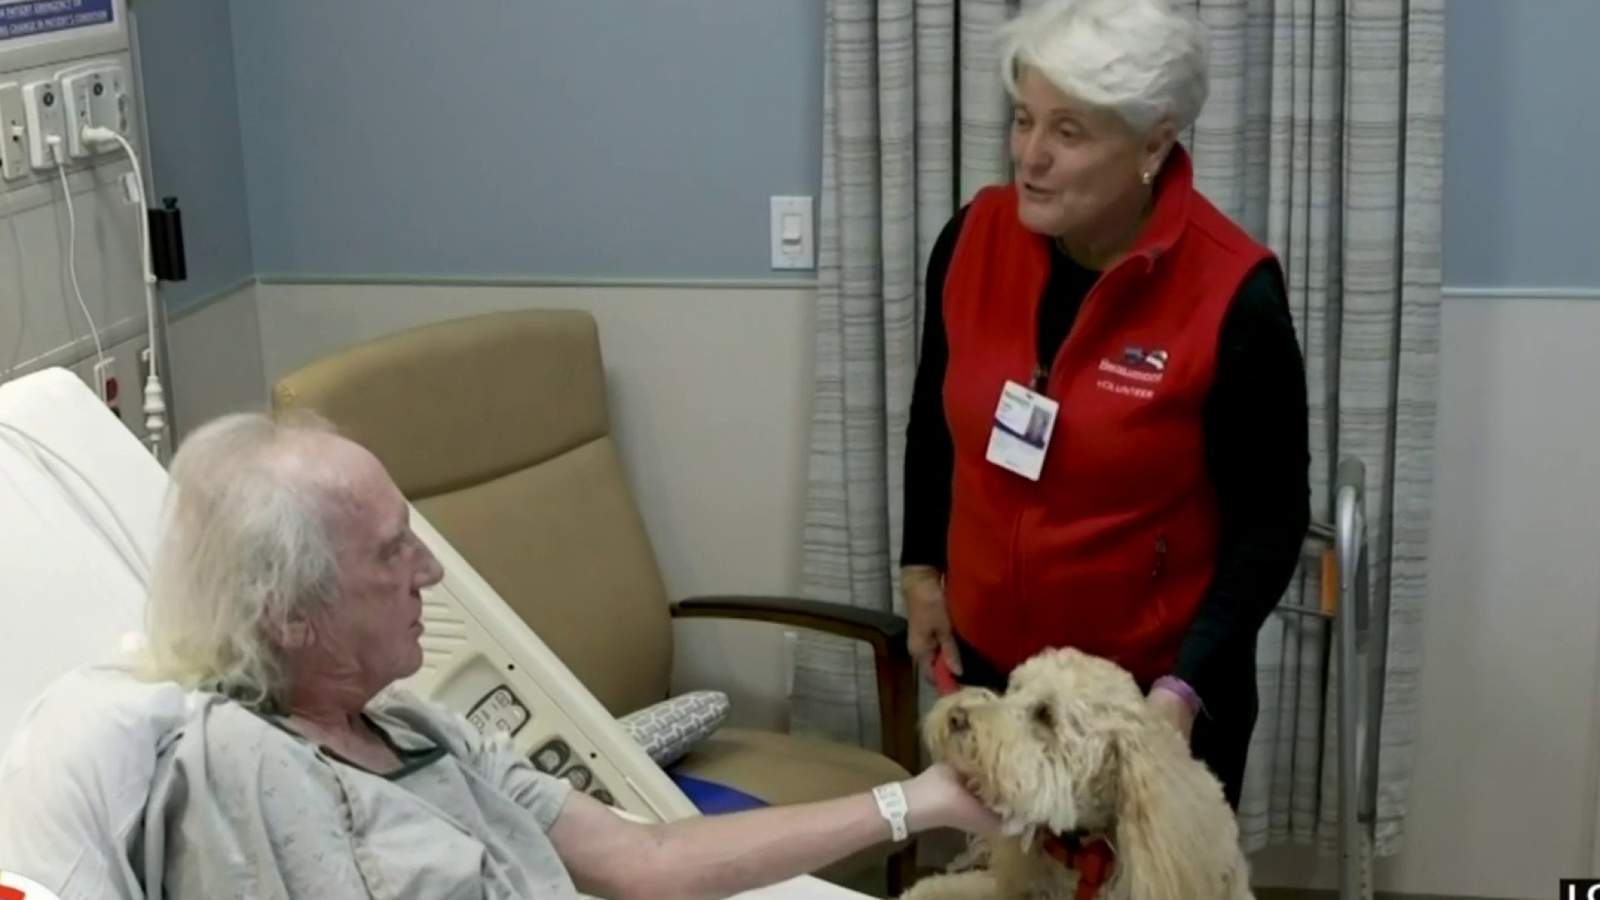 Dogs are helping patients heal